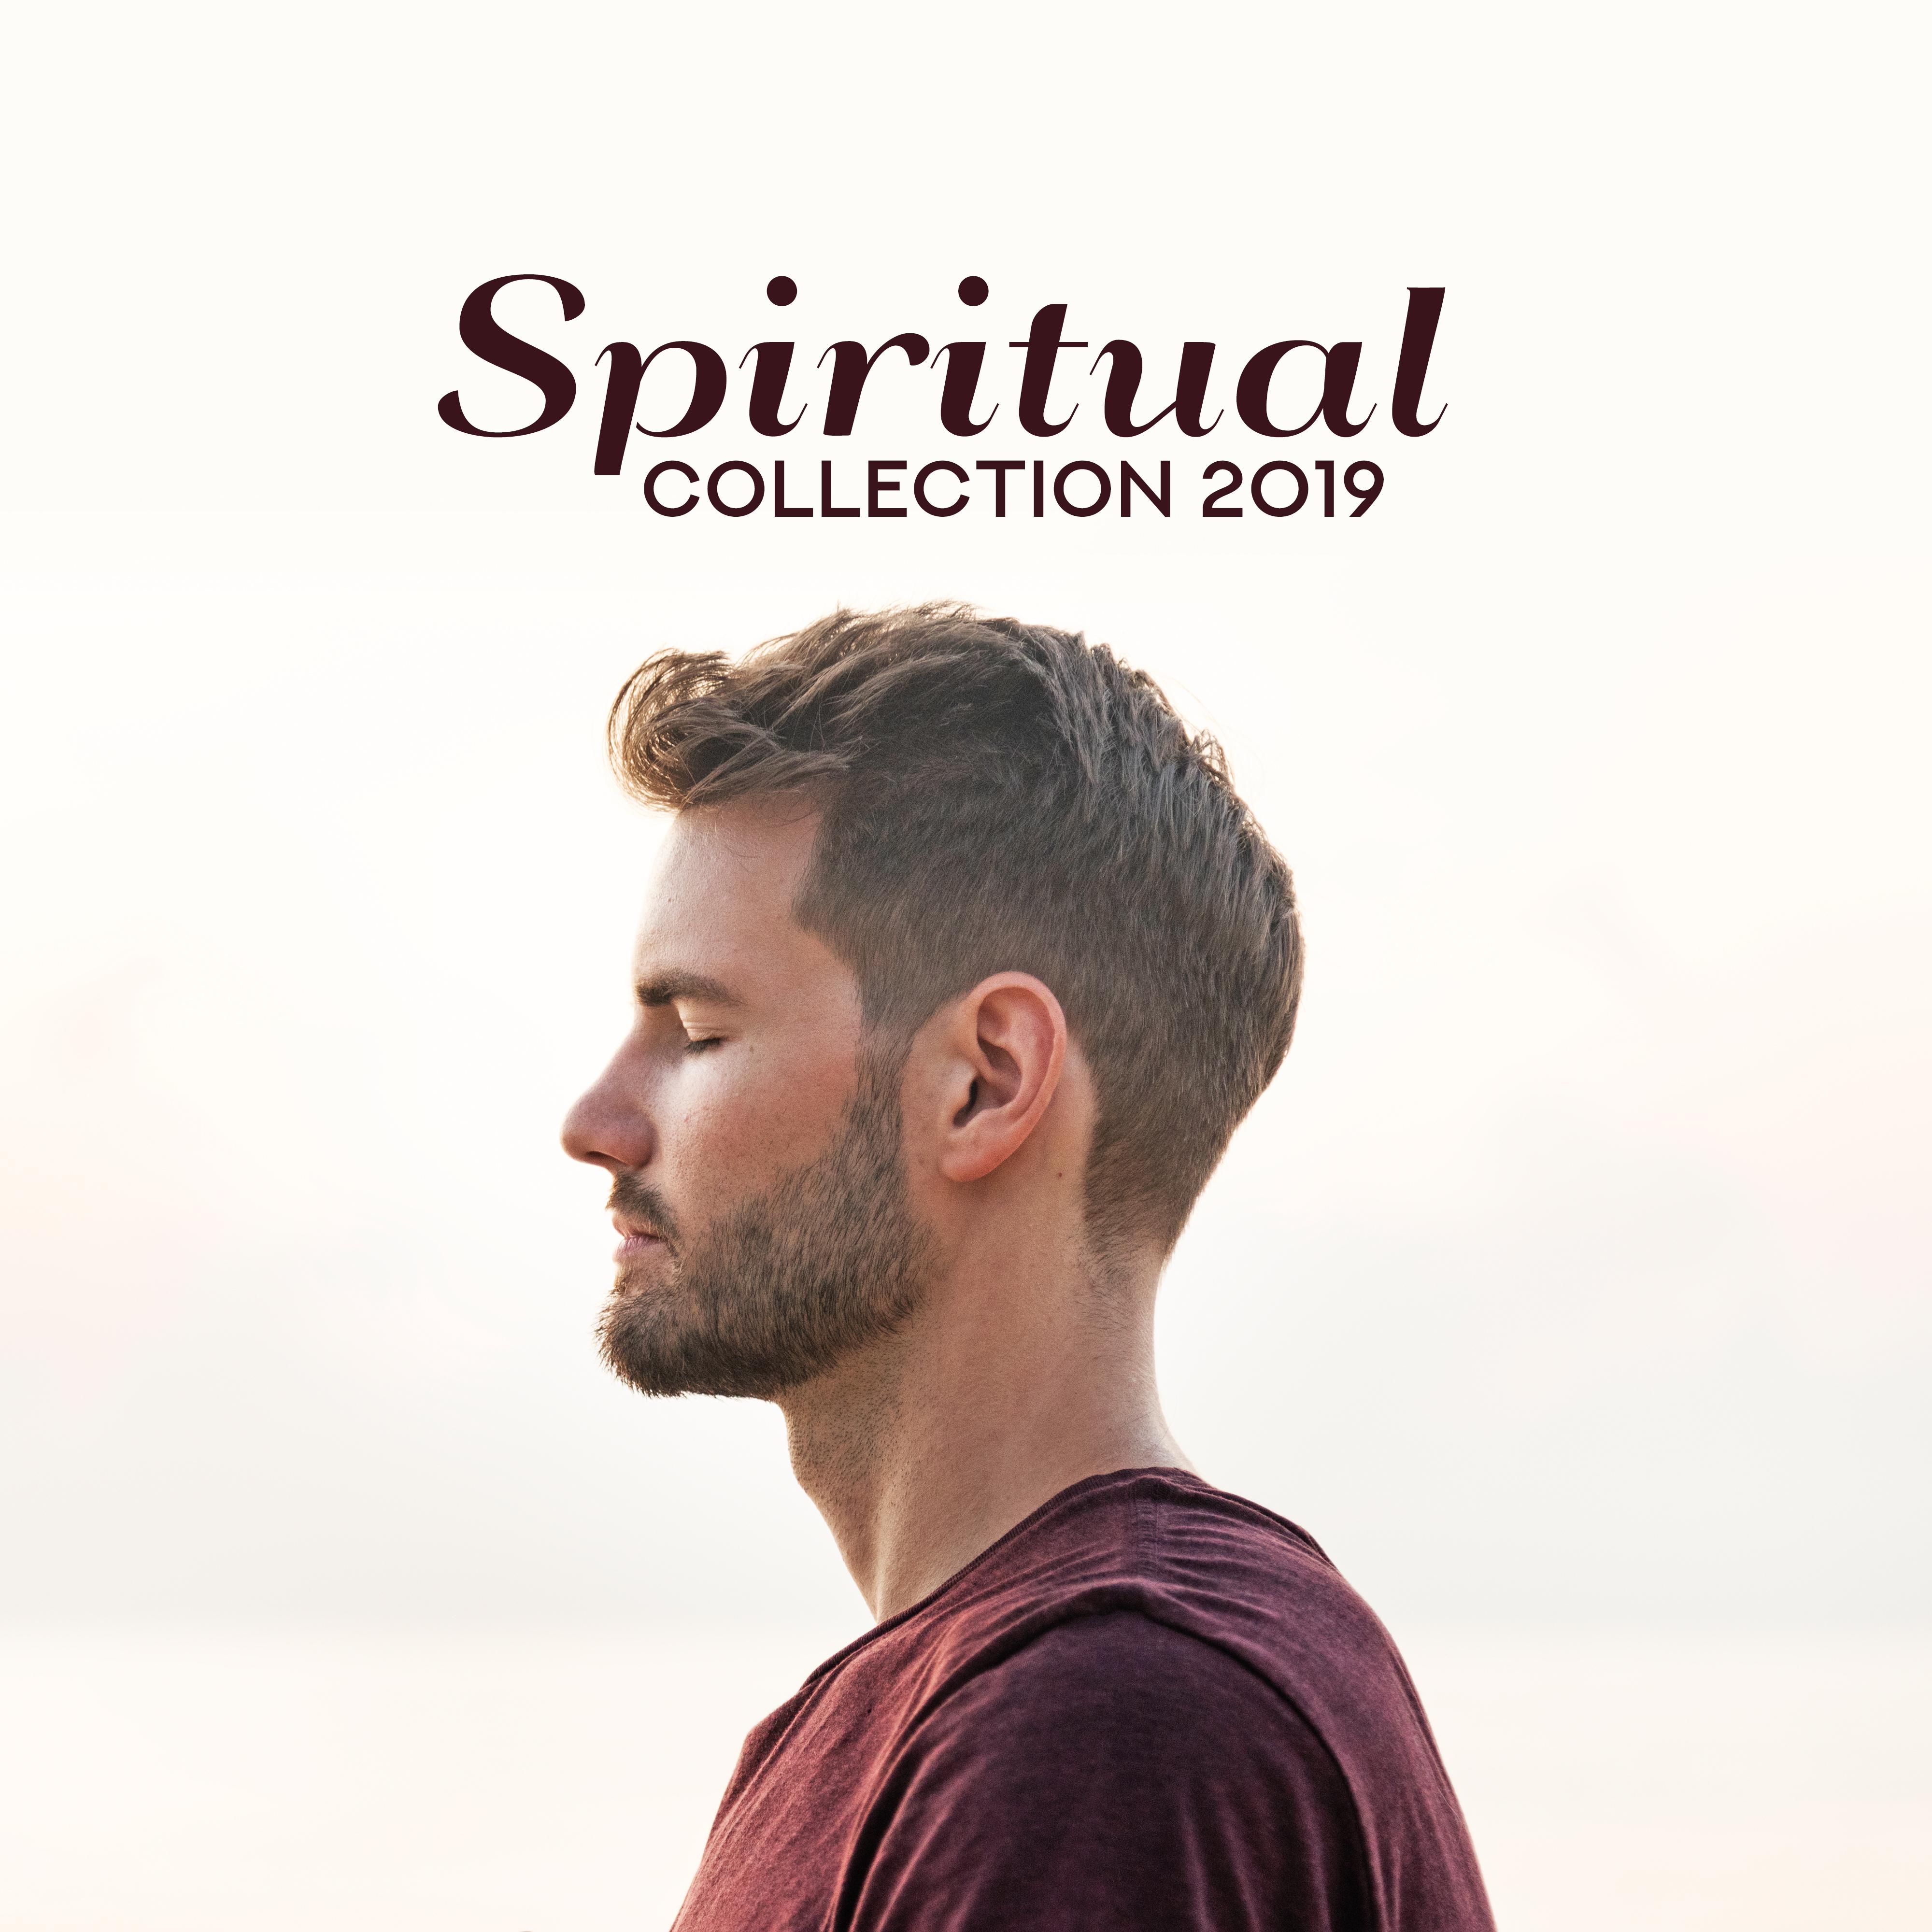 Spiritual Collection 2019 – Meditation Music Zone, Music for Mind, Yoga Meditation, Mindfulness Tracks, Zen Vibrations, Relaxing Music to Calm Down